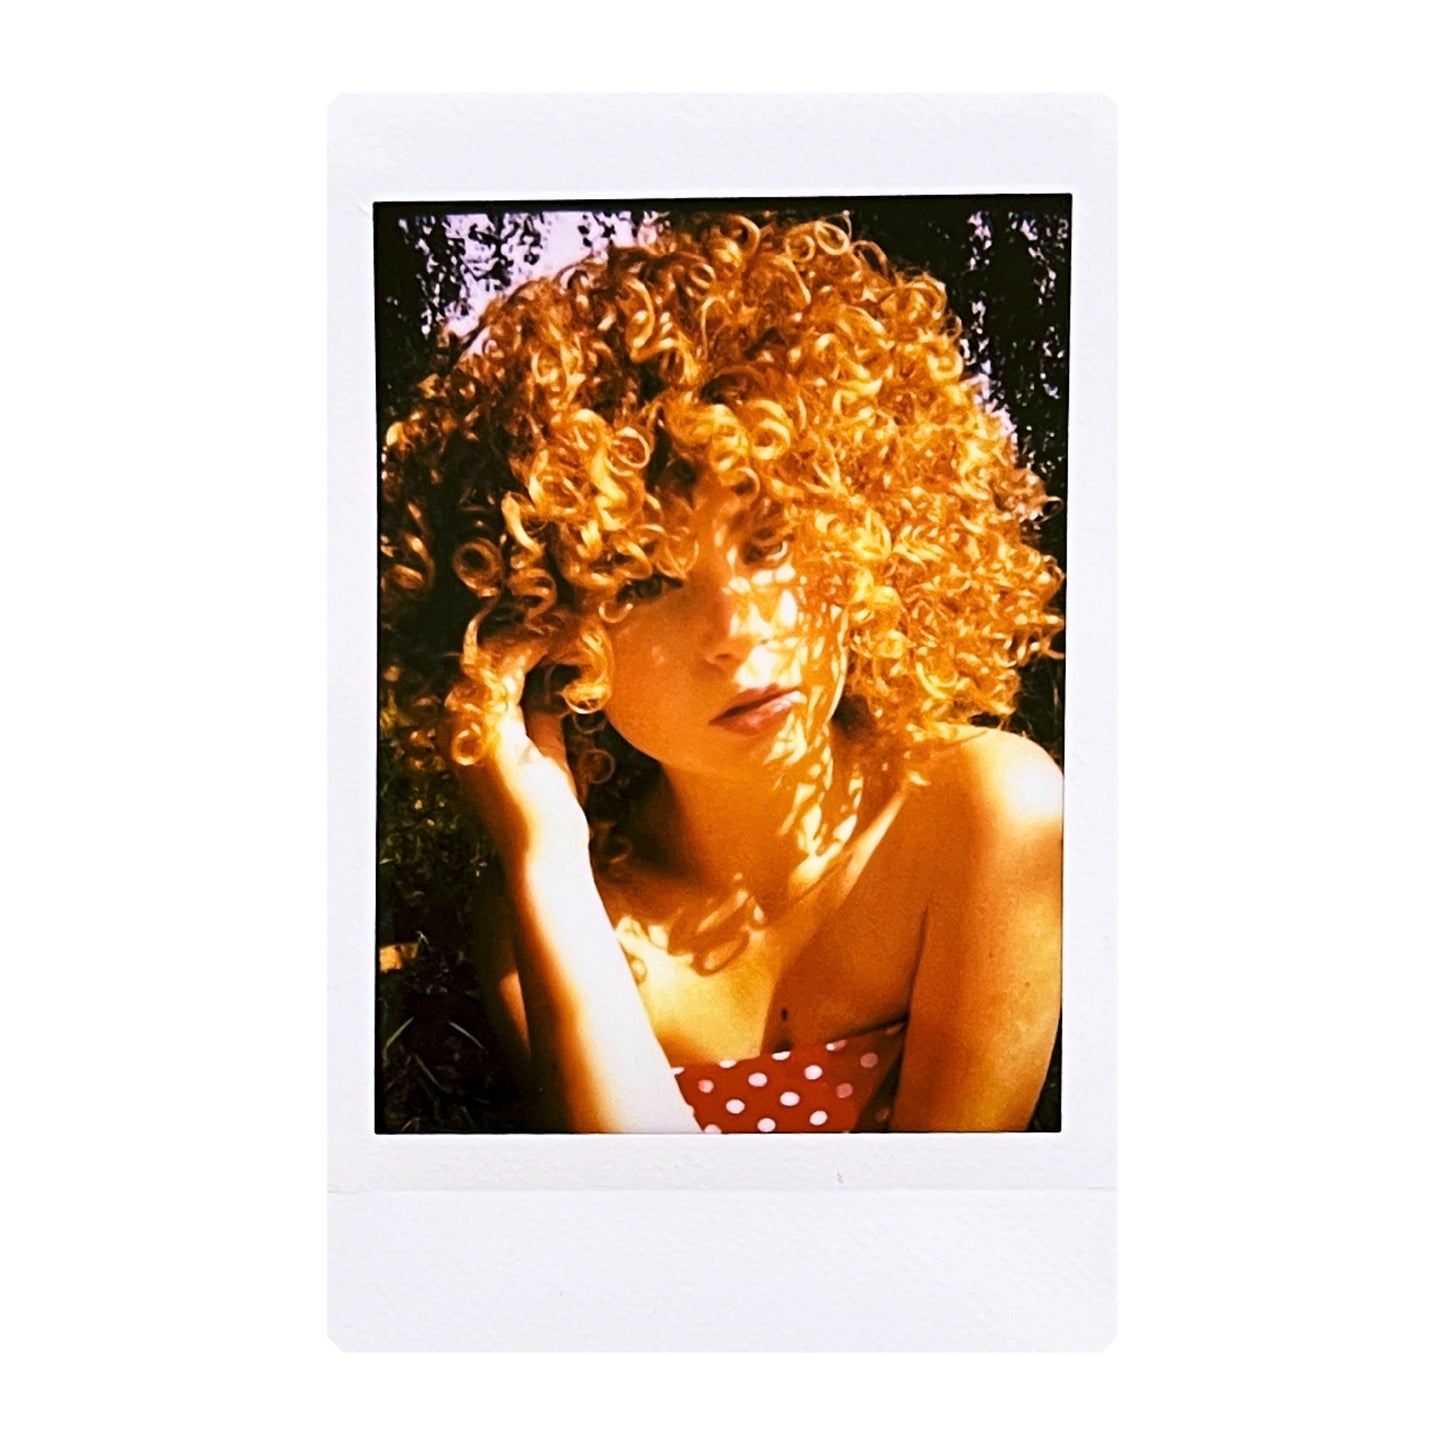 Double exposure instant photo of the girl with curls made with Jollylook EYE